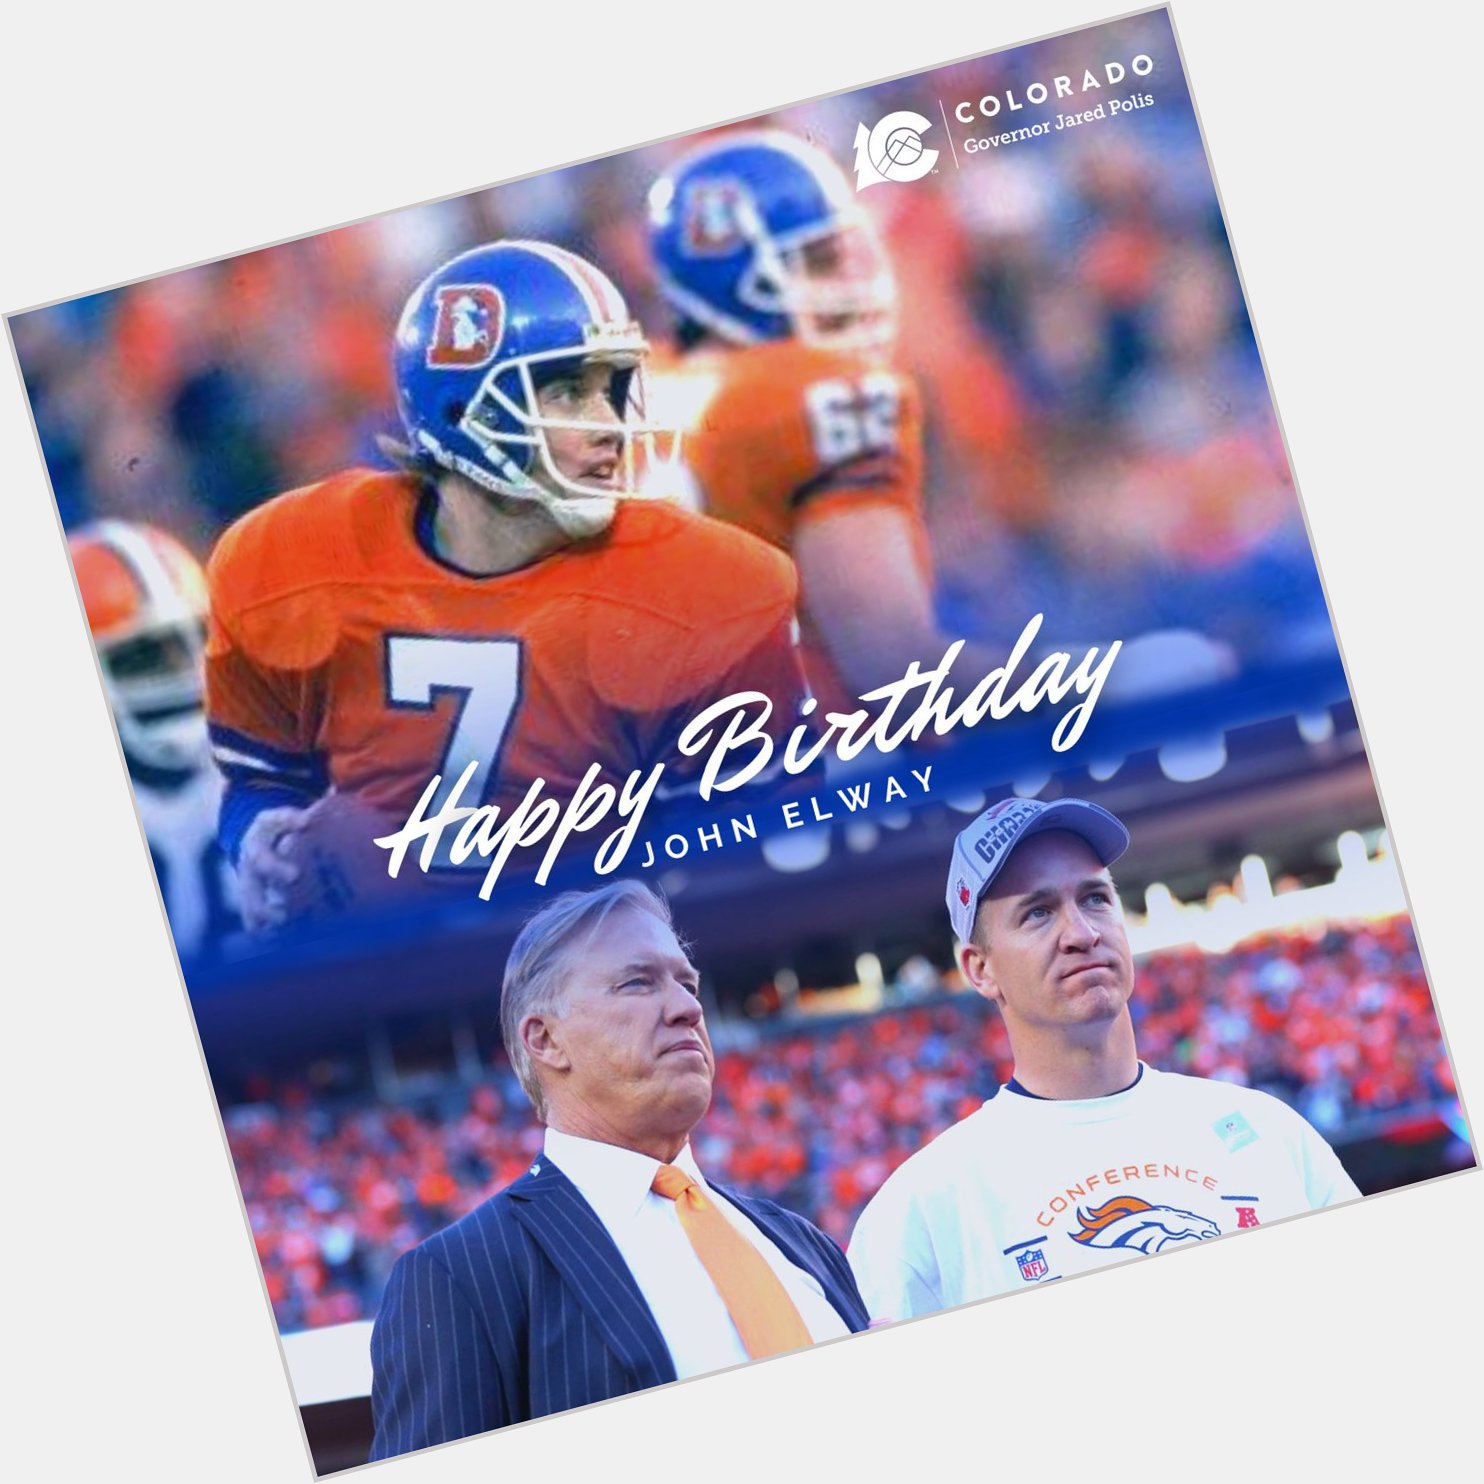 Happy Birthday to a Mile High Dual Champ and living legend, John Elway! 